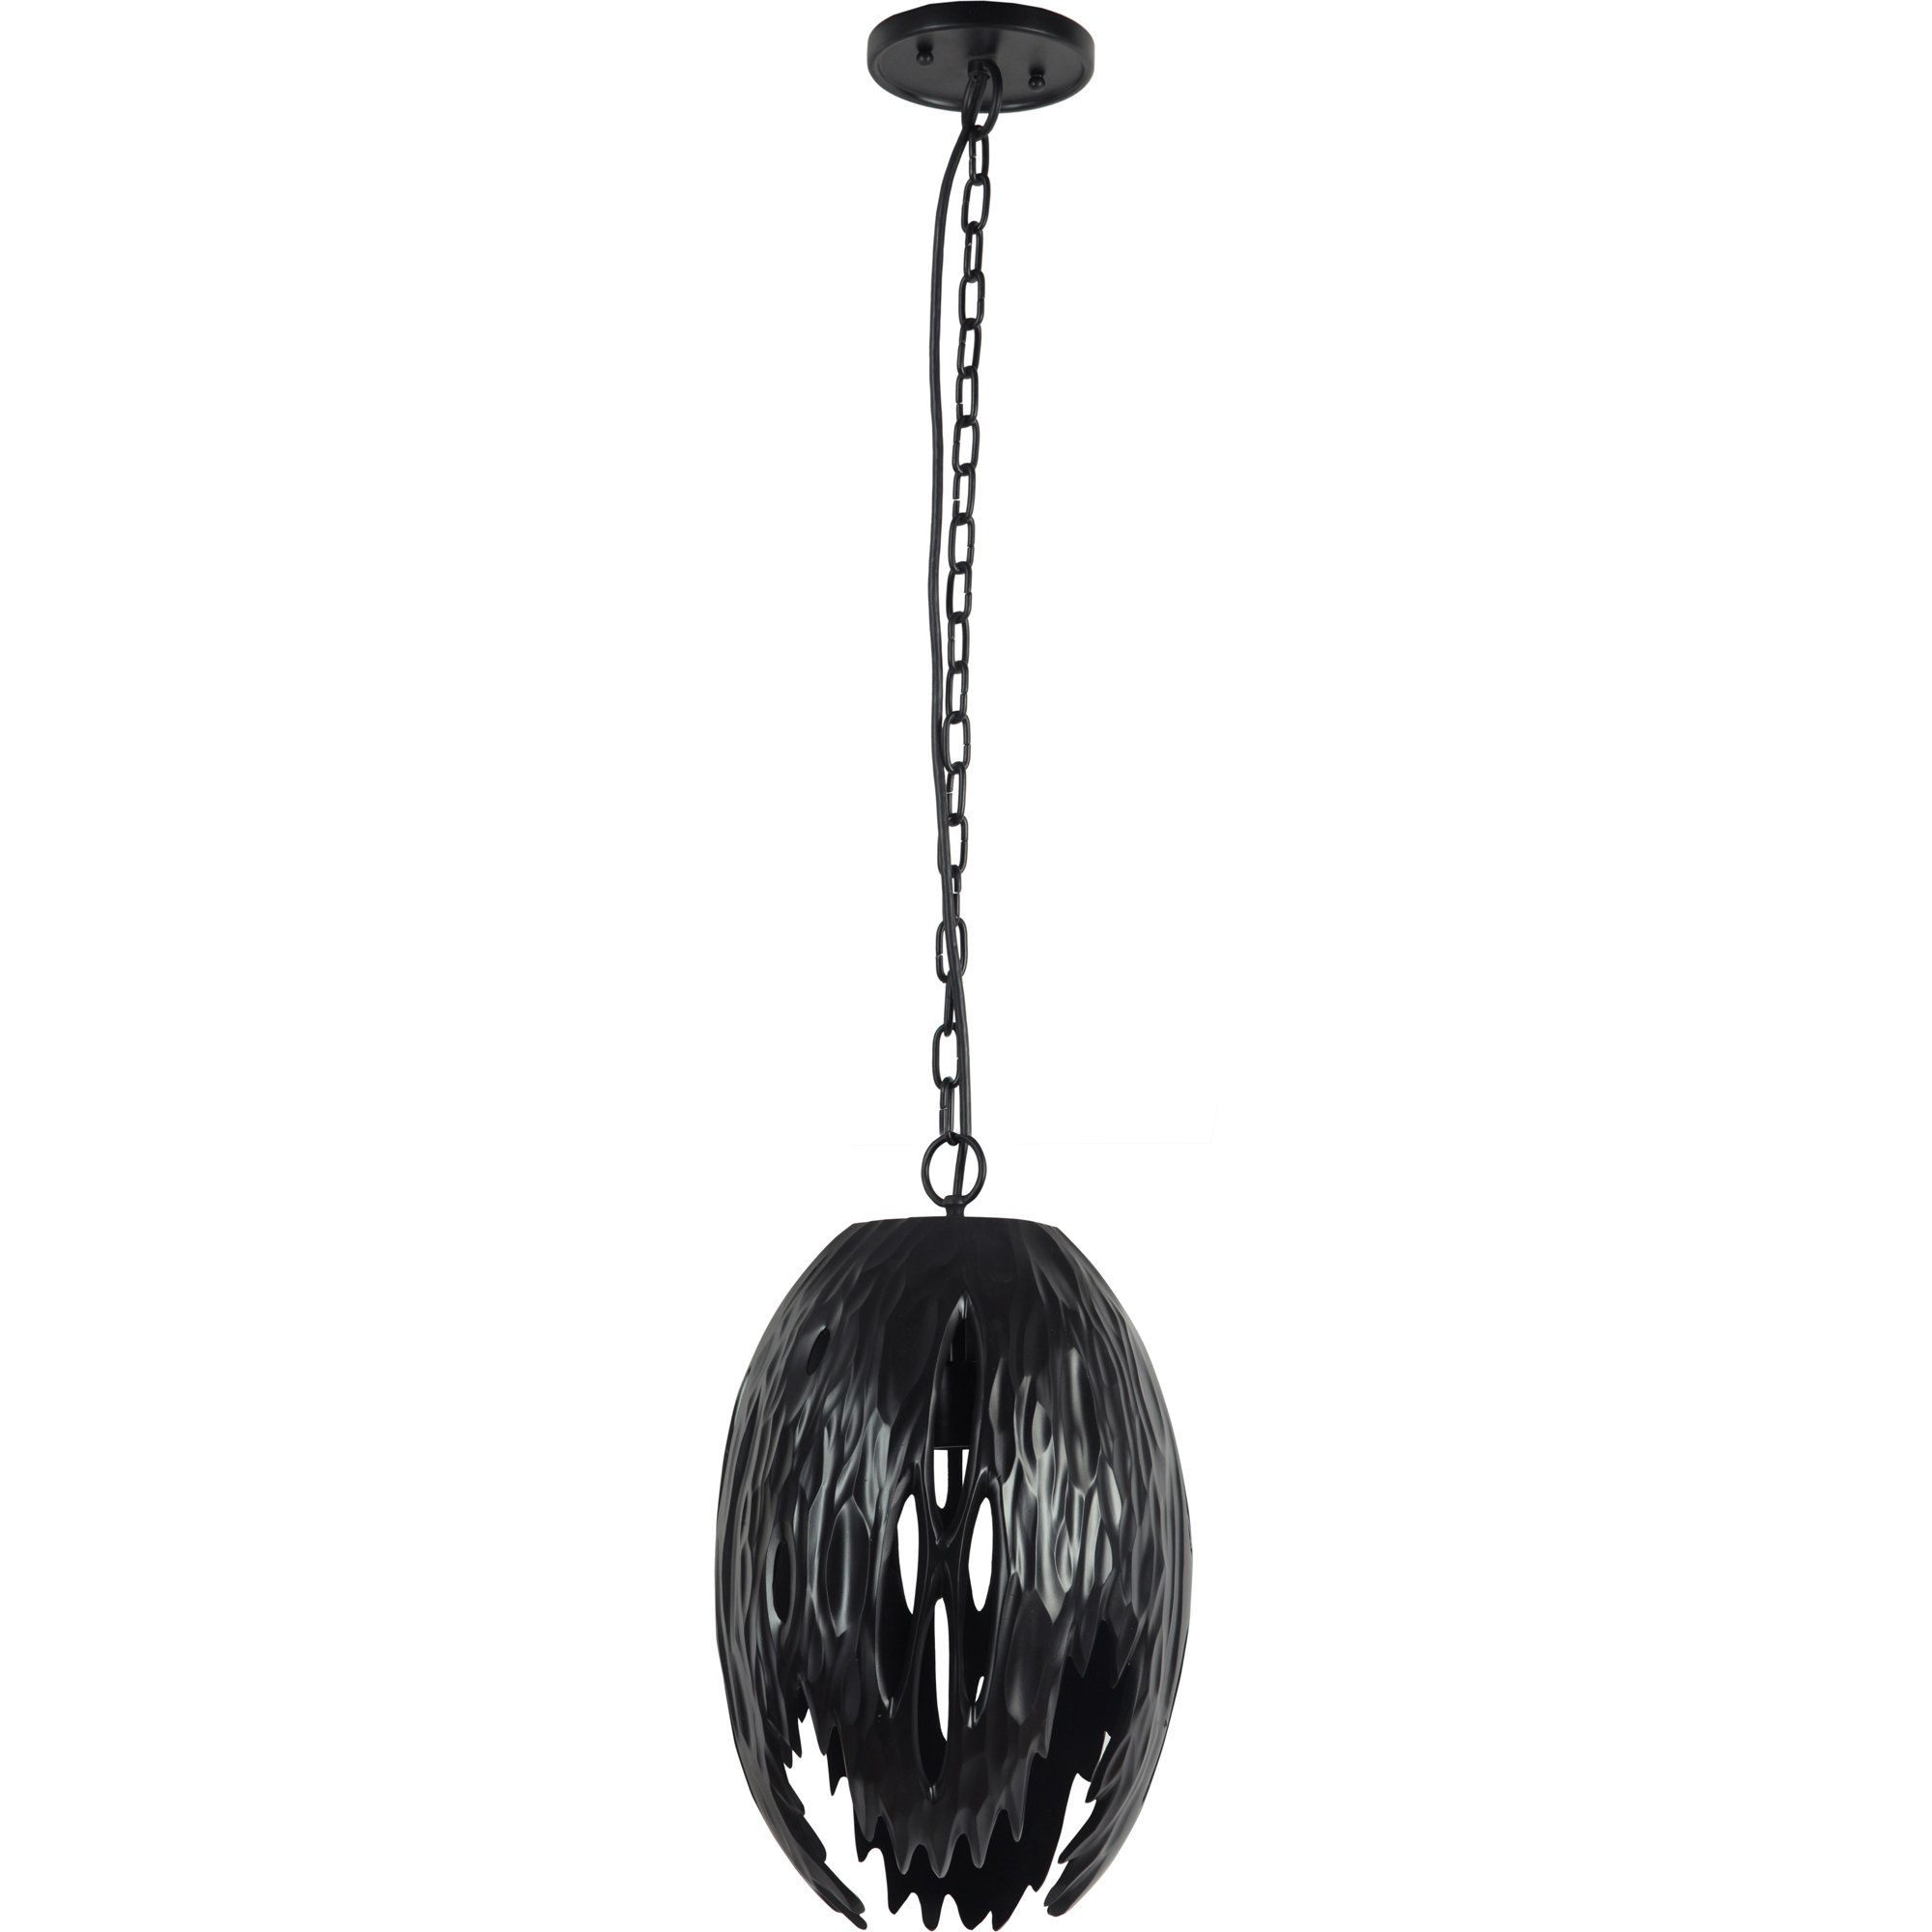 Pinedo Cocoon Metal 1 Light Novelty Pendant Pertaining To Fashionable Rossi Industrial Vintage 1 Light Geometric Pendants (View 4 of 20)